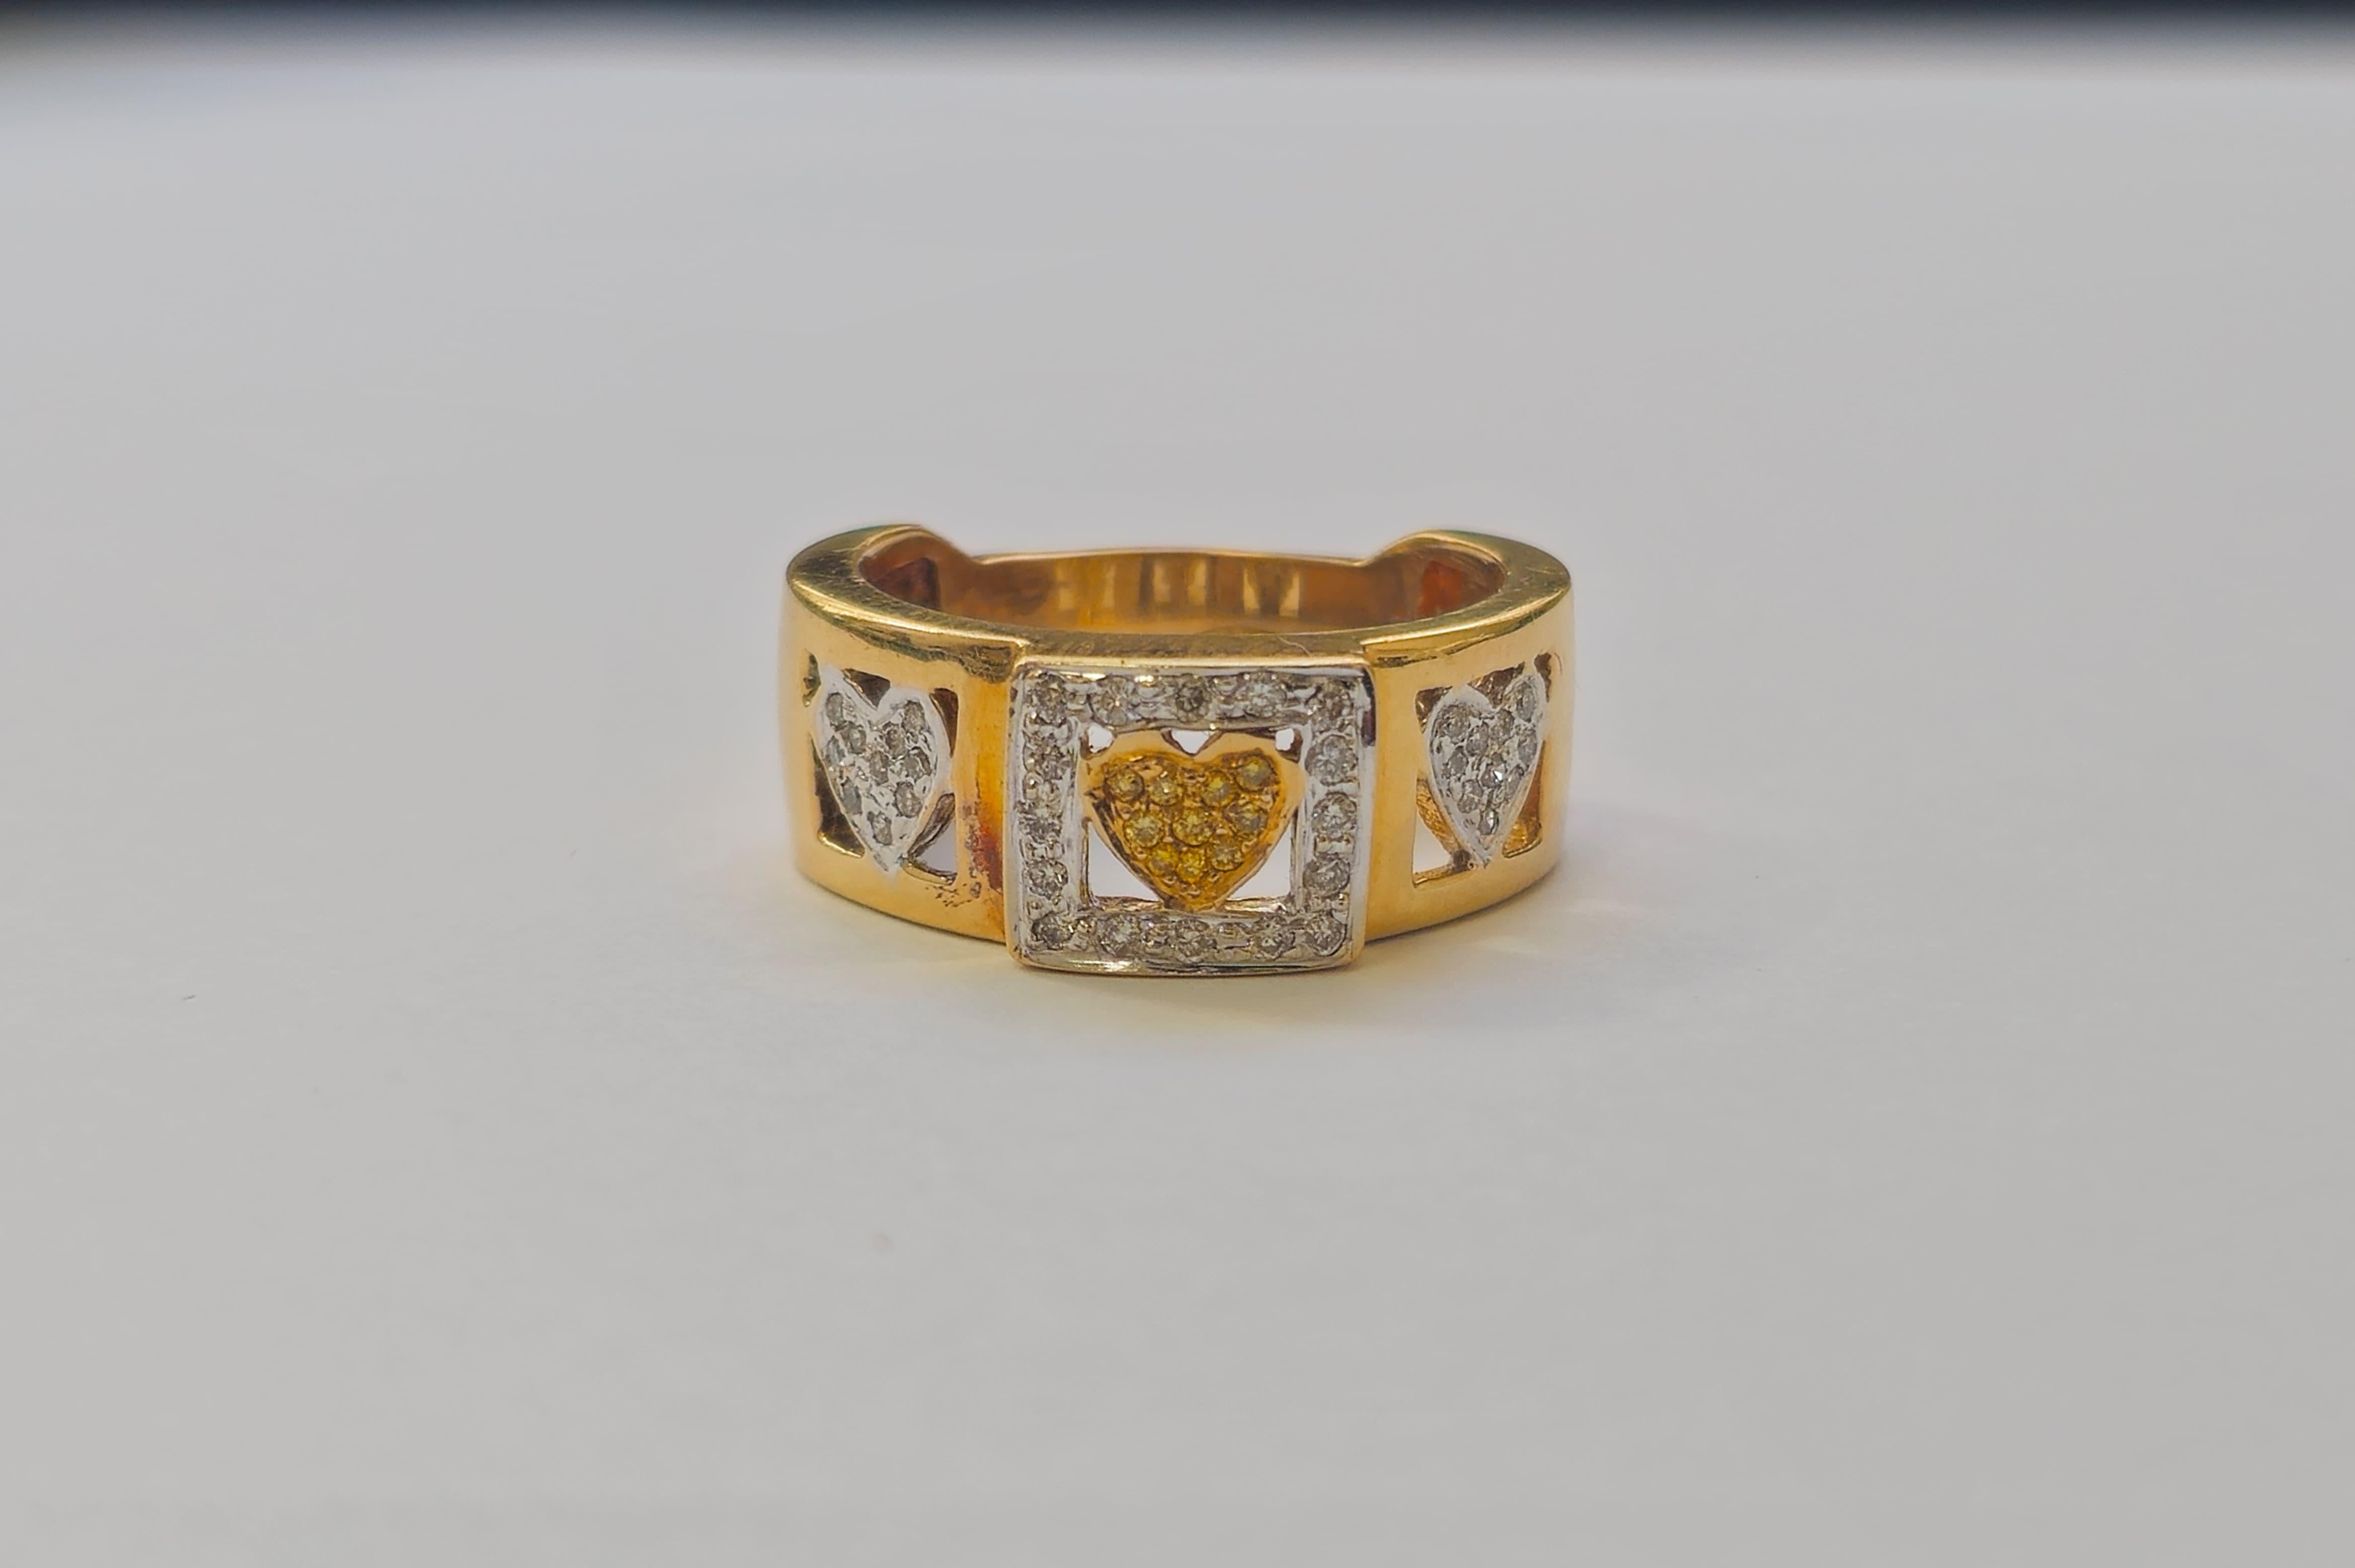 0.30ct Diamond Ring in 14k Yellow Gold In Excellent Condition For Sale In Miami, FL